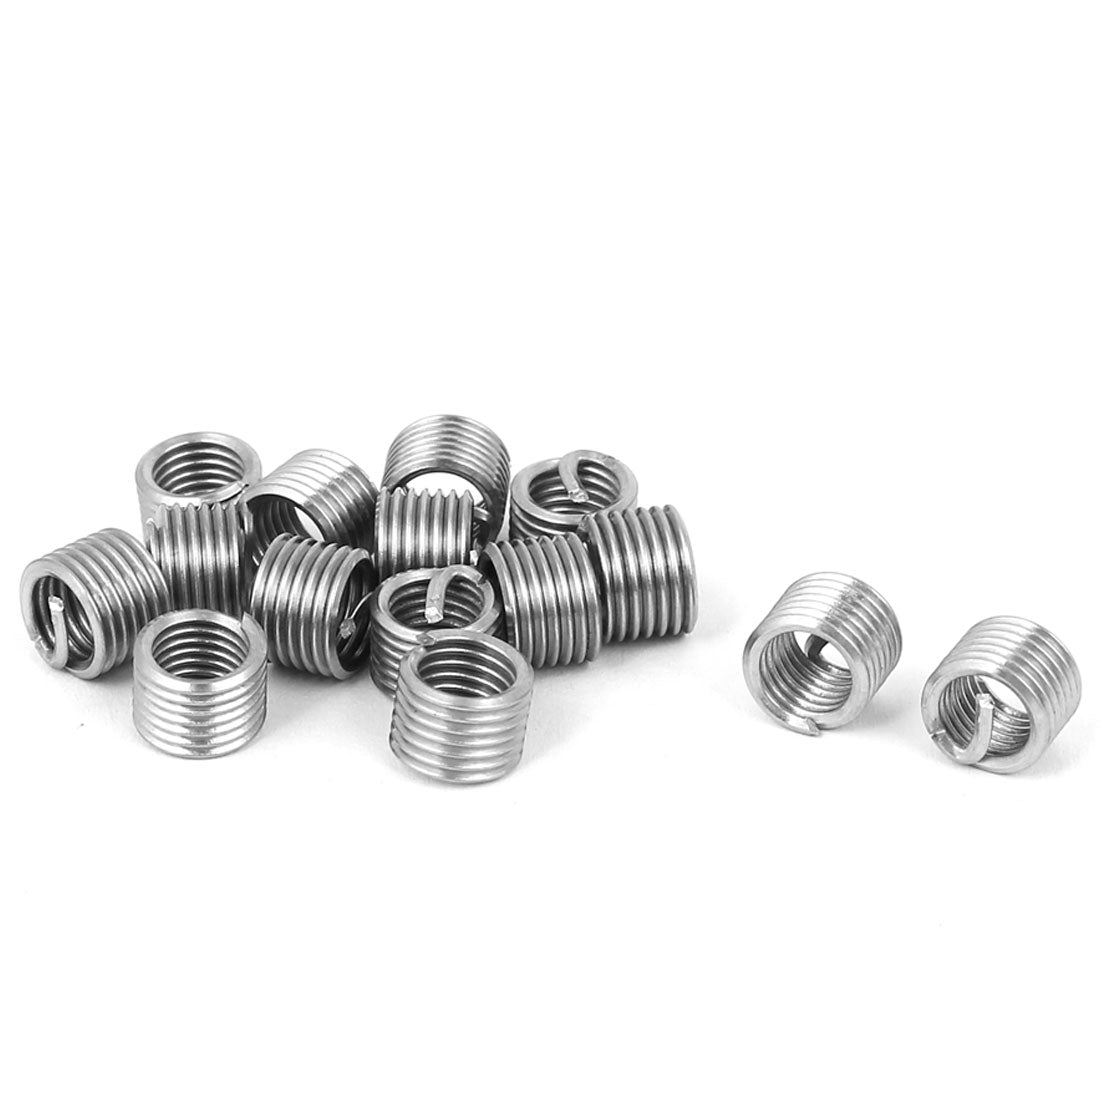 uxcell Uxcell M6x1mmx1.5D Stainless Steel Helicoil Wire Thread Repair Inserts 15pcs